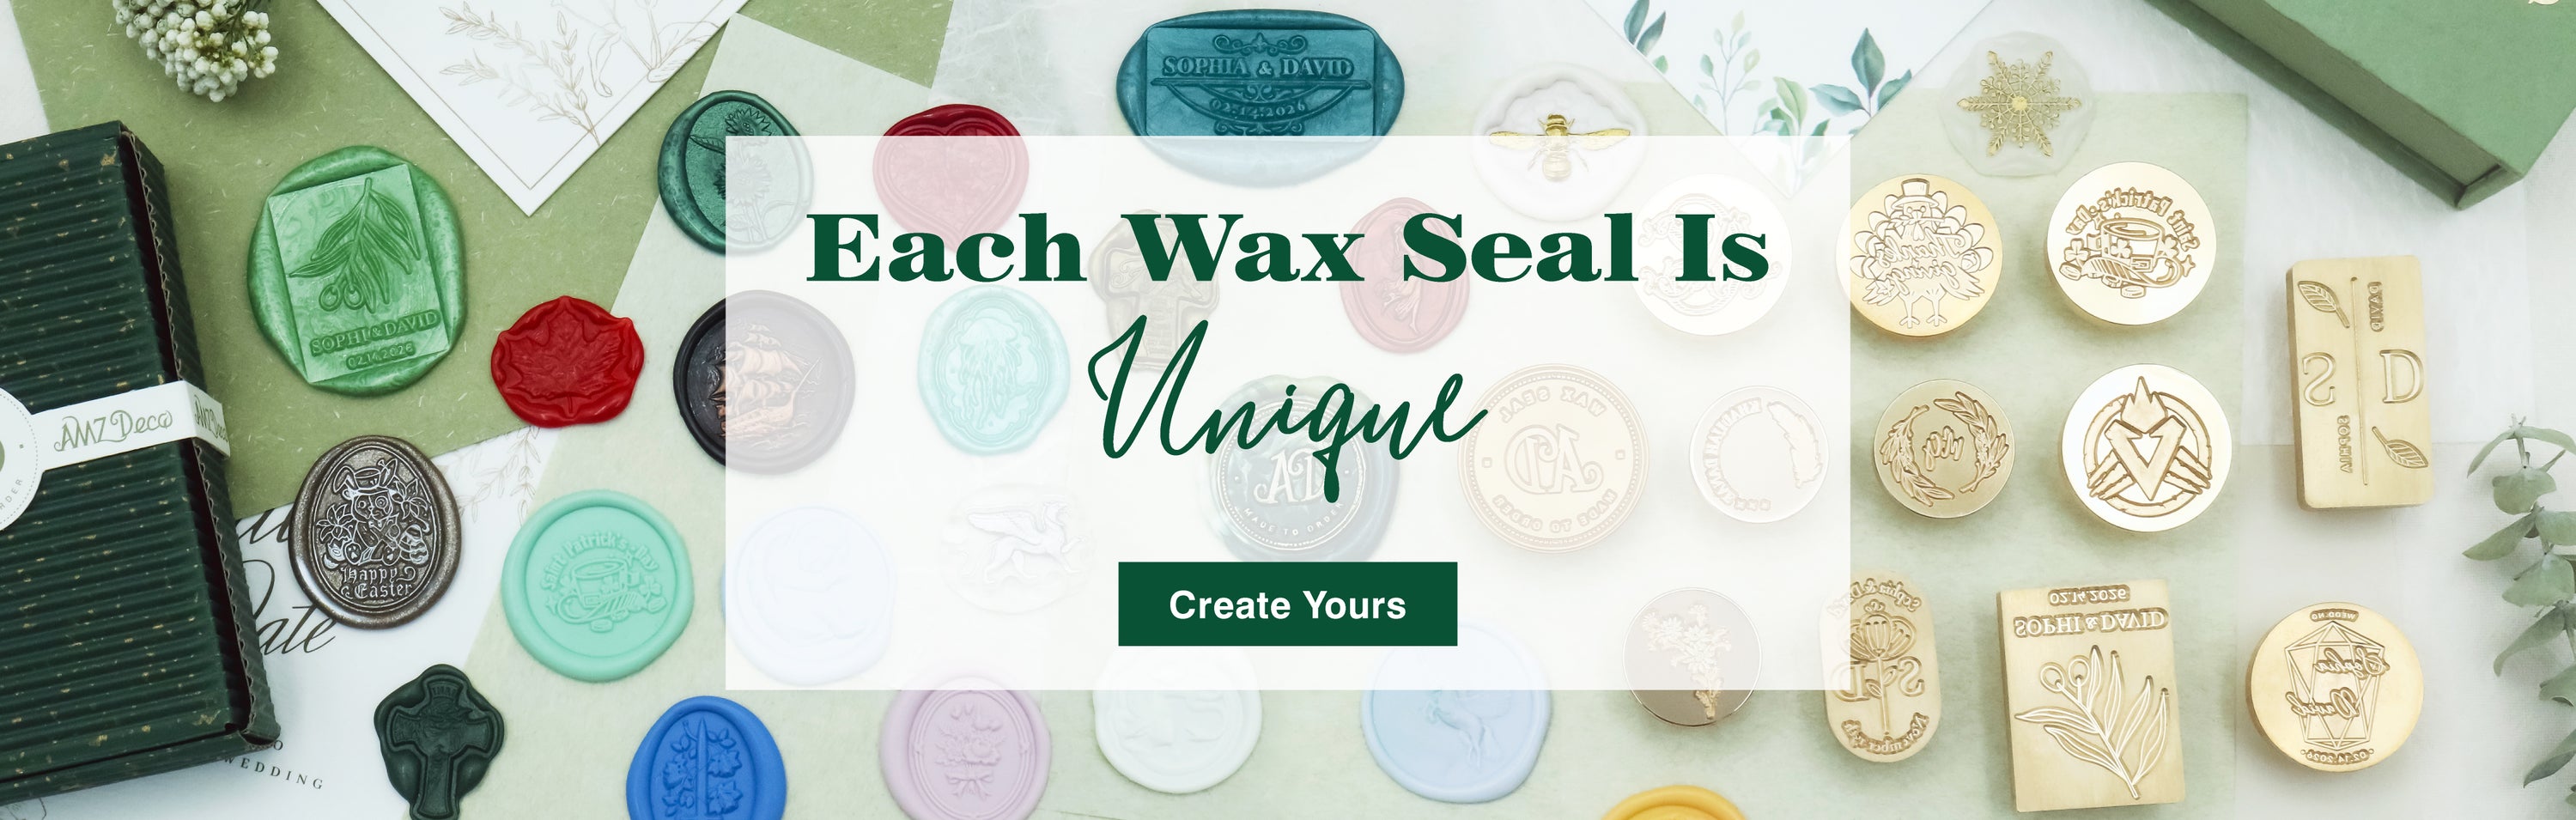 Premade-and-custom-wax-seal-stamps-for-wedding-invites-and-business-events